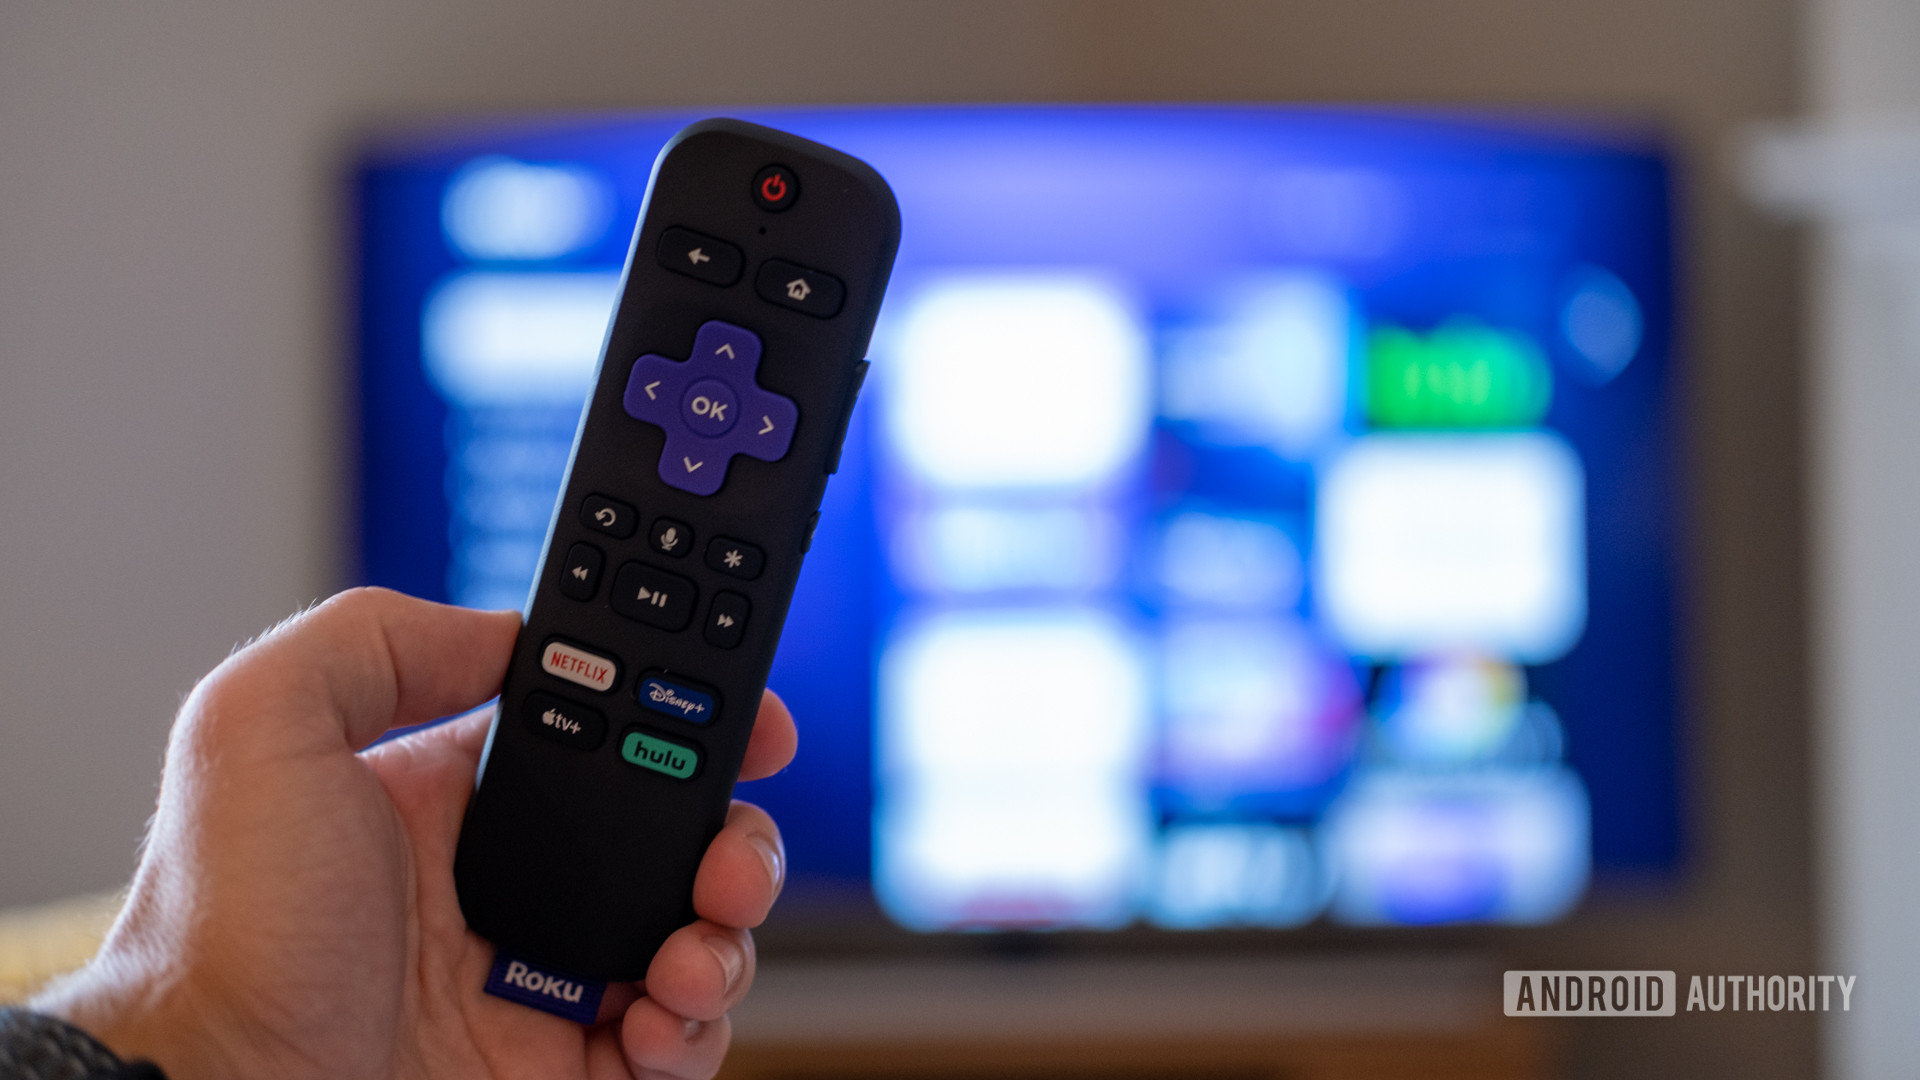 Roku Streaming Stick 4K remote control in front of the TV